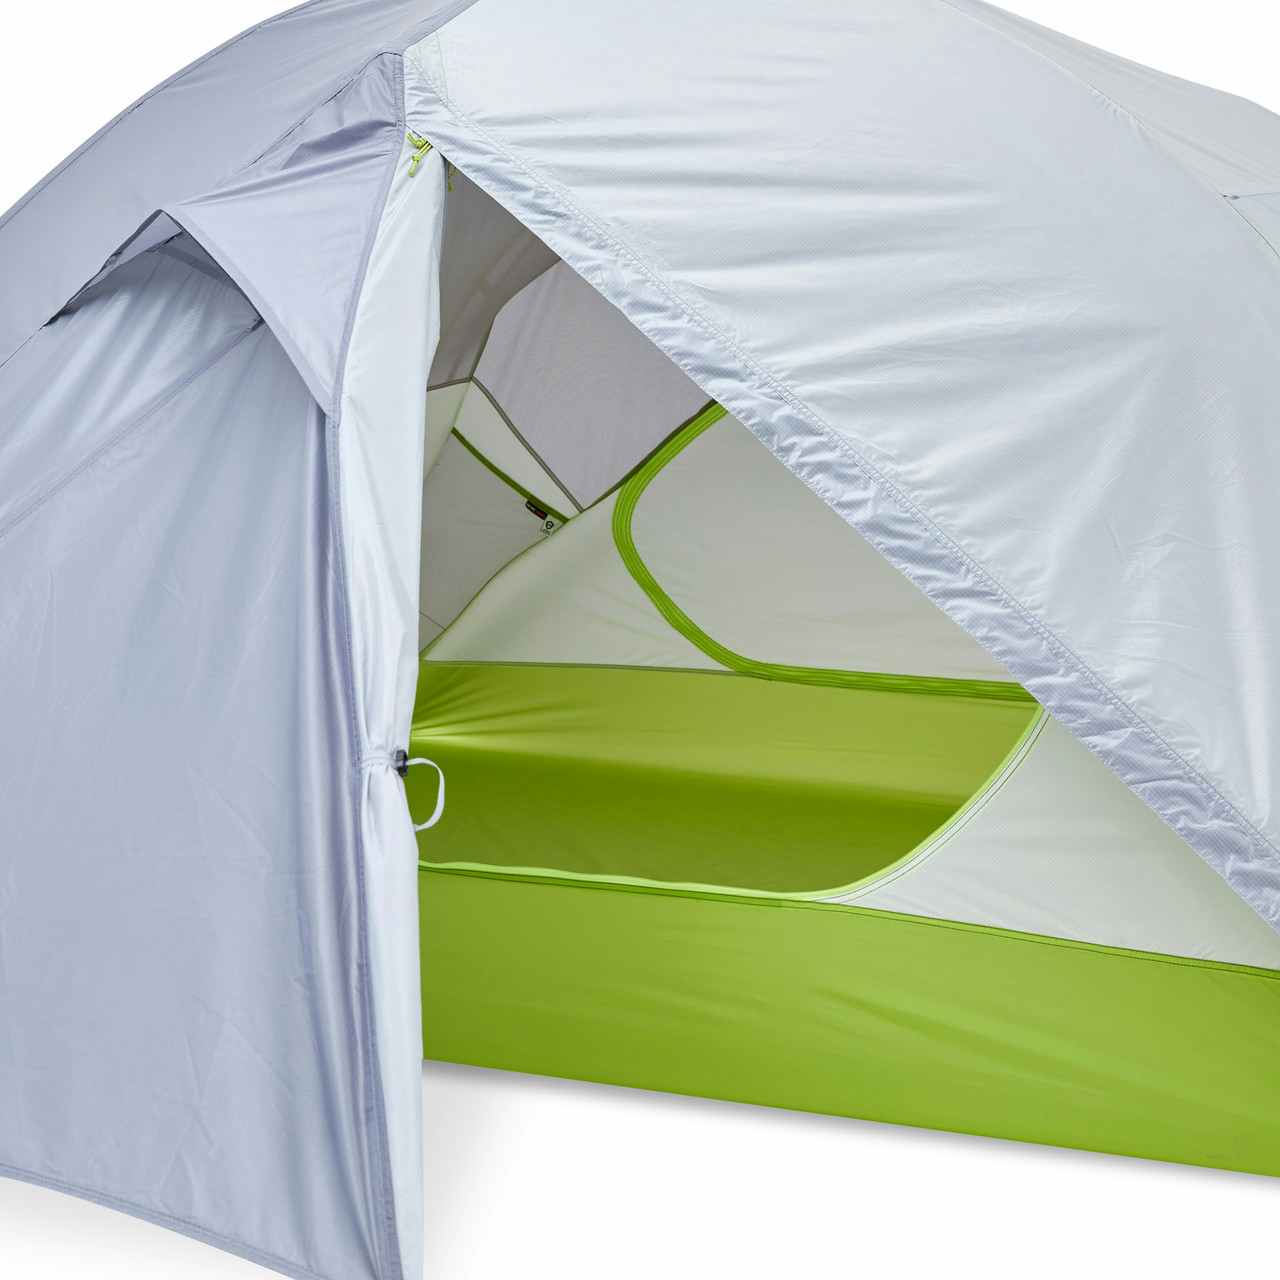 AMP 3-Person Tent Stainless Steel/Sour Appl